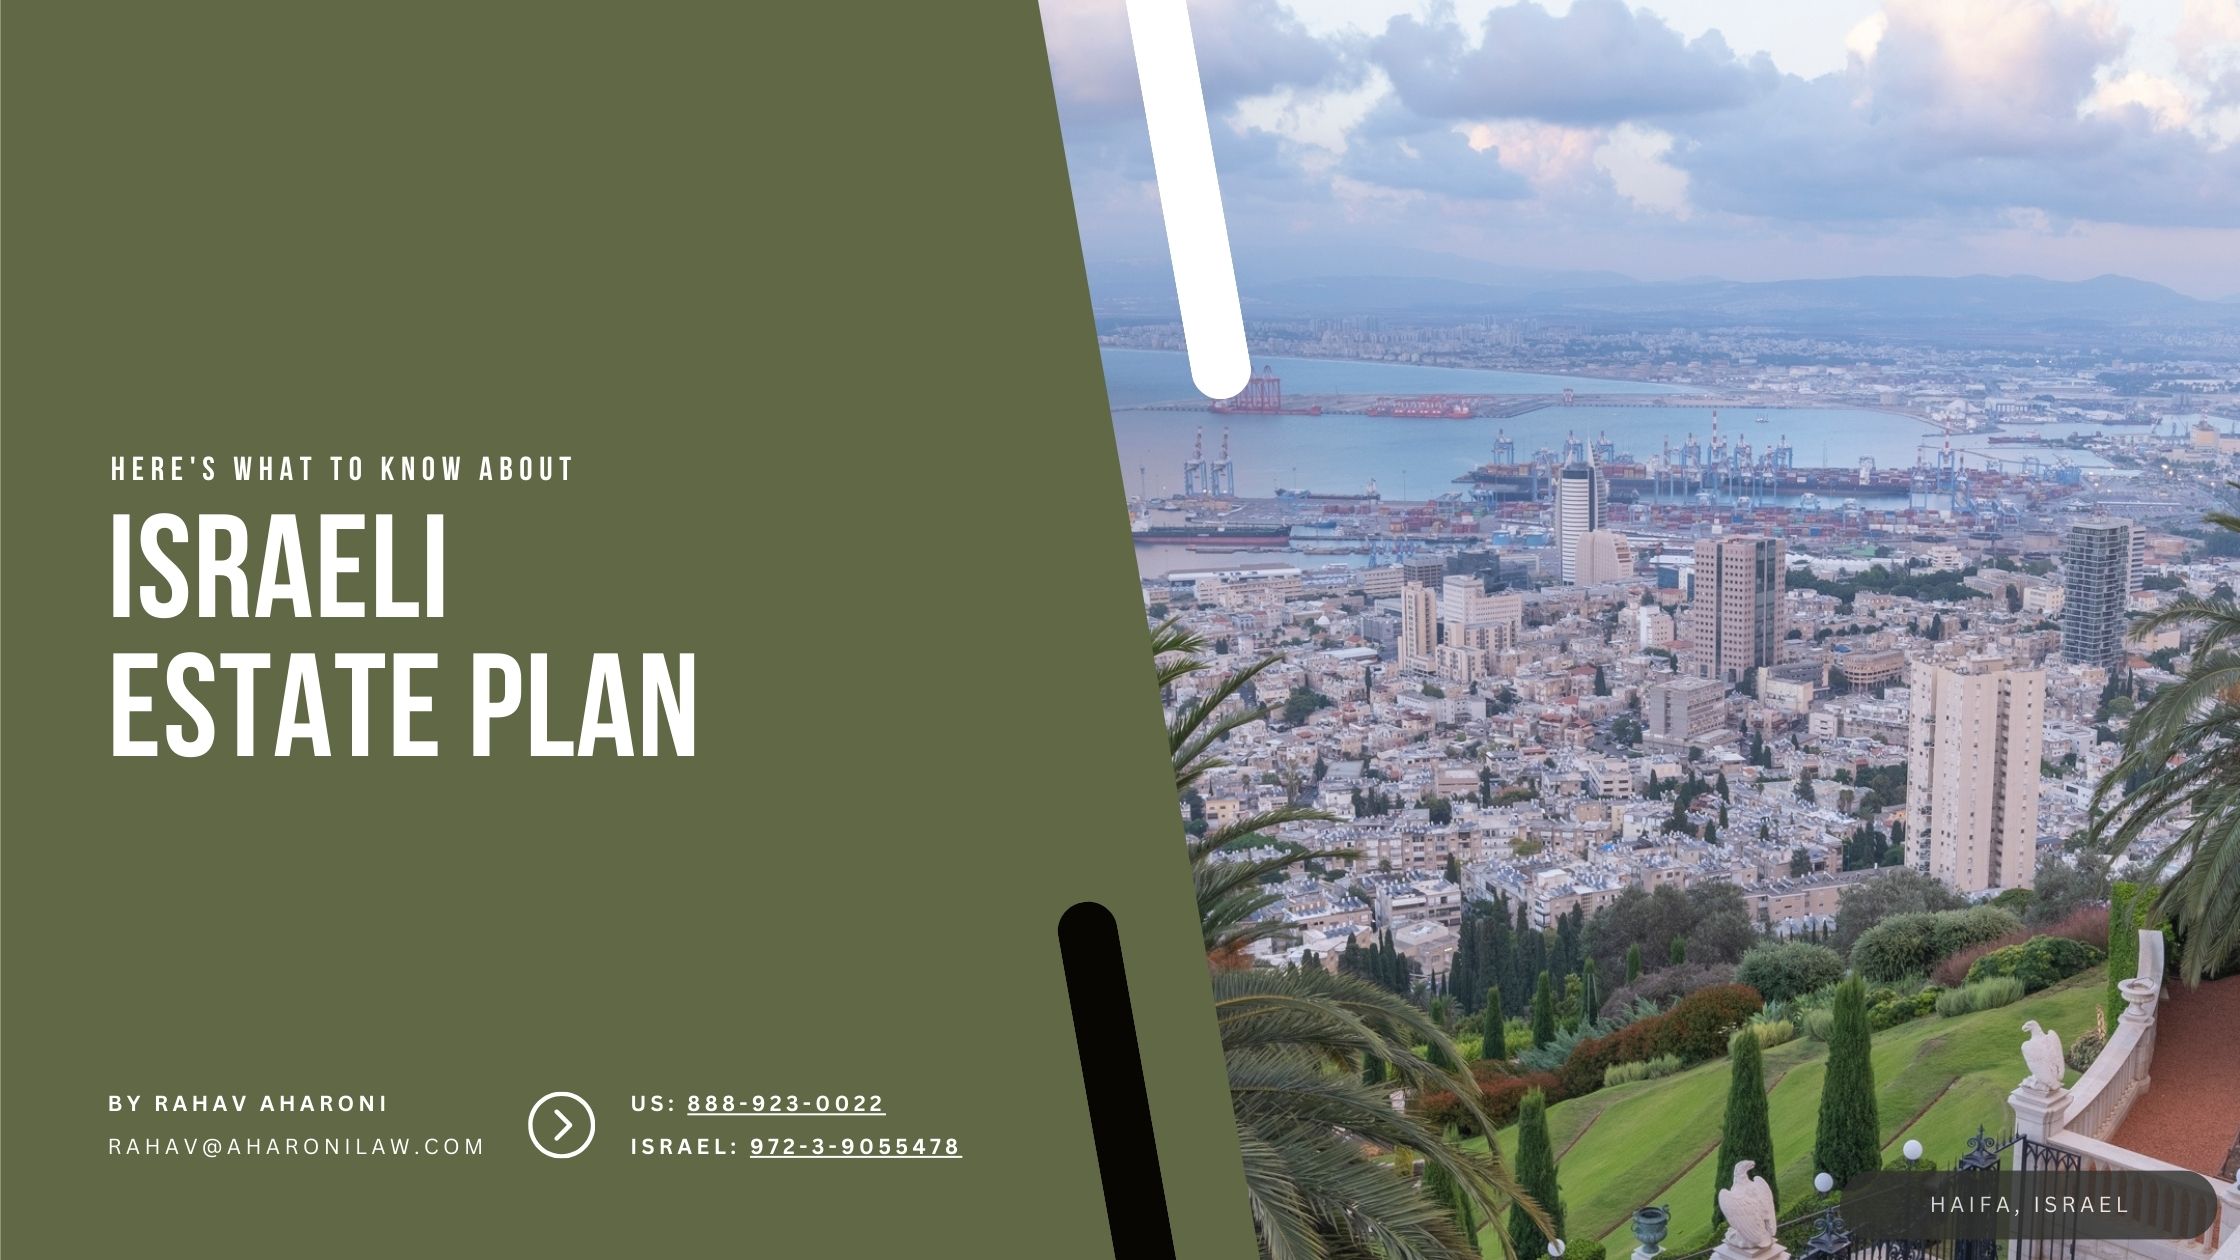 What Should an Israeli Estate Plan Include?